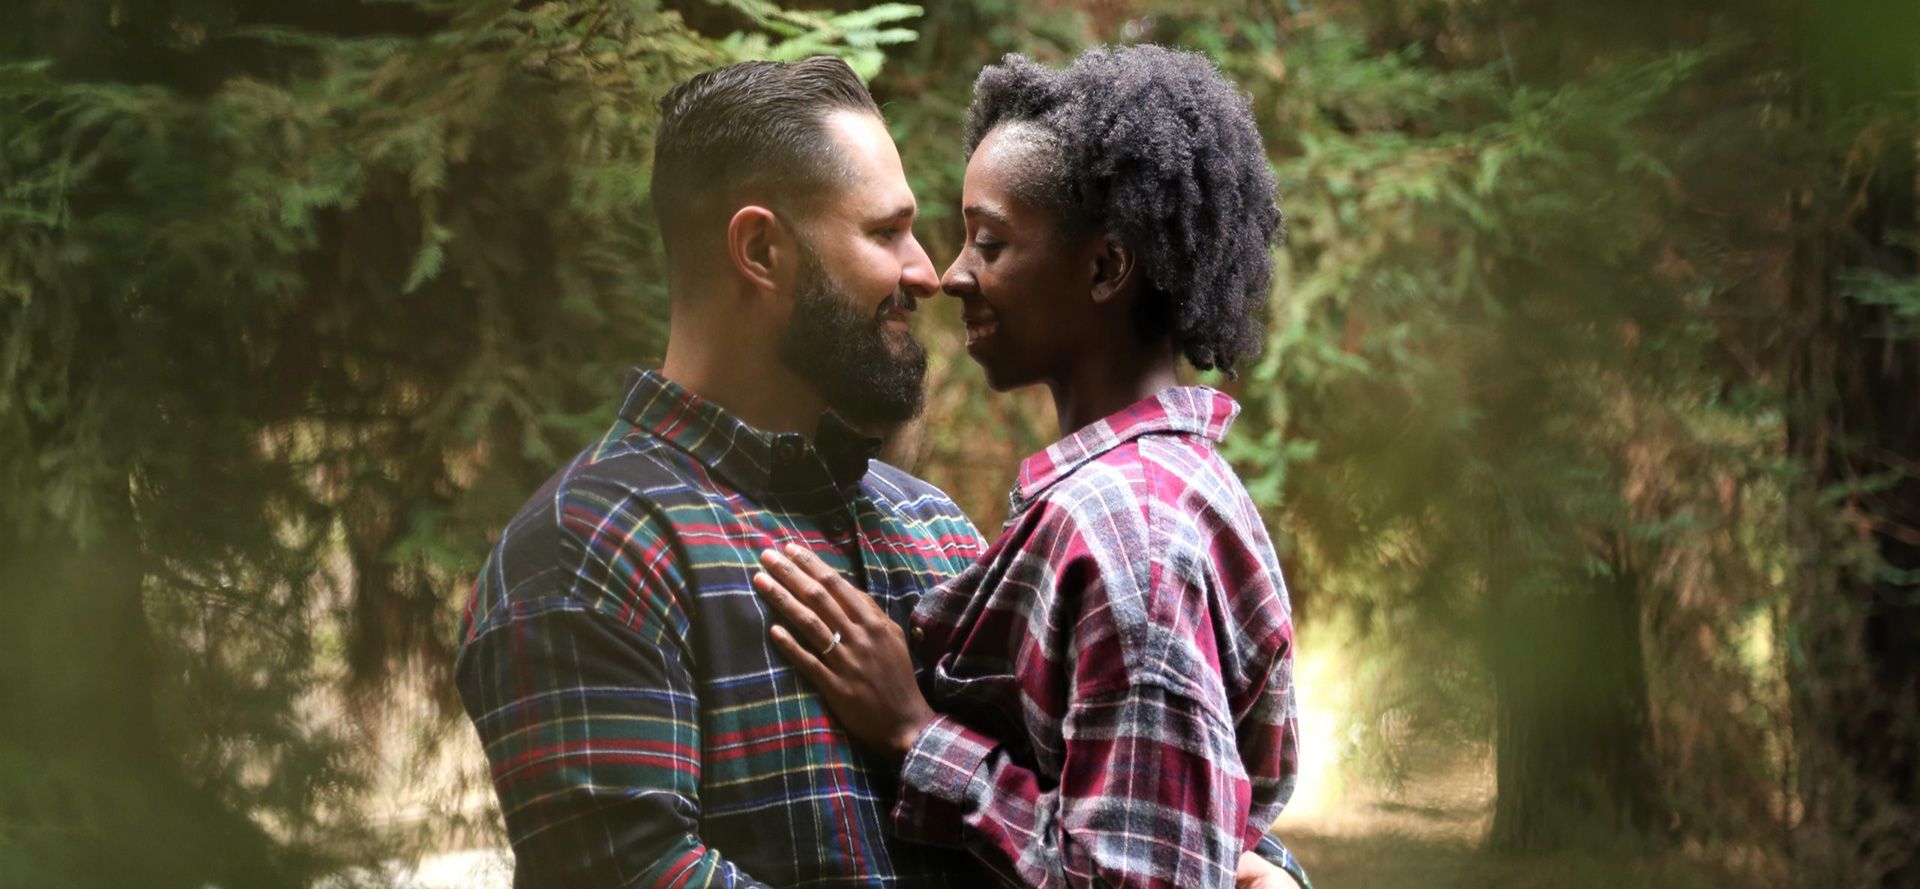 White man and black woman on a date in the forest.